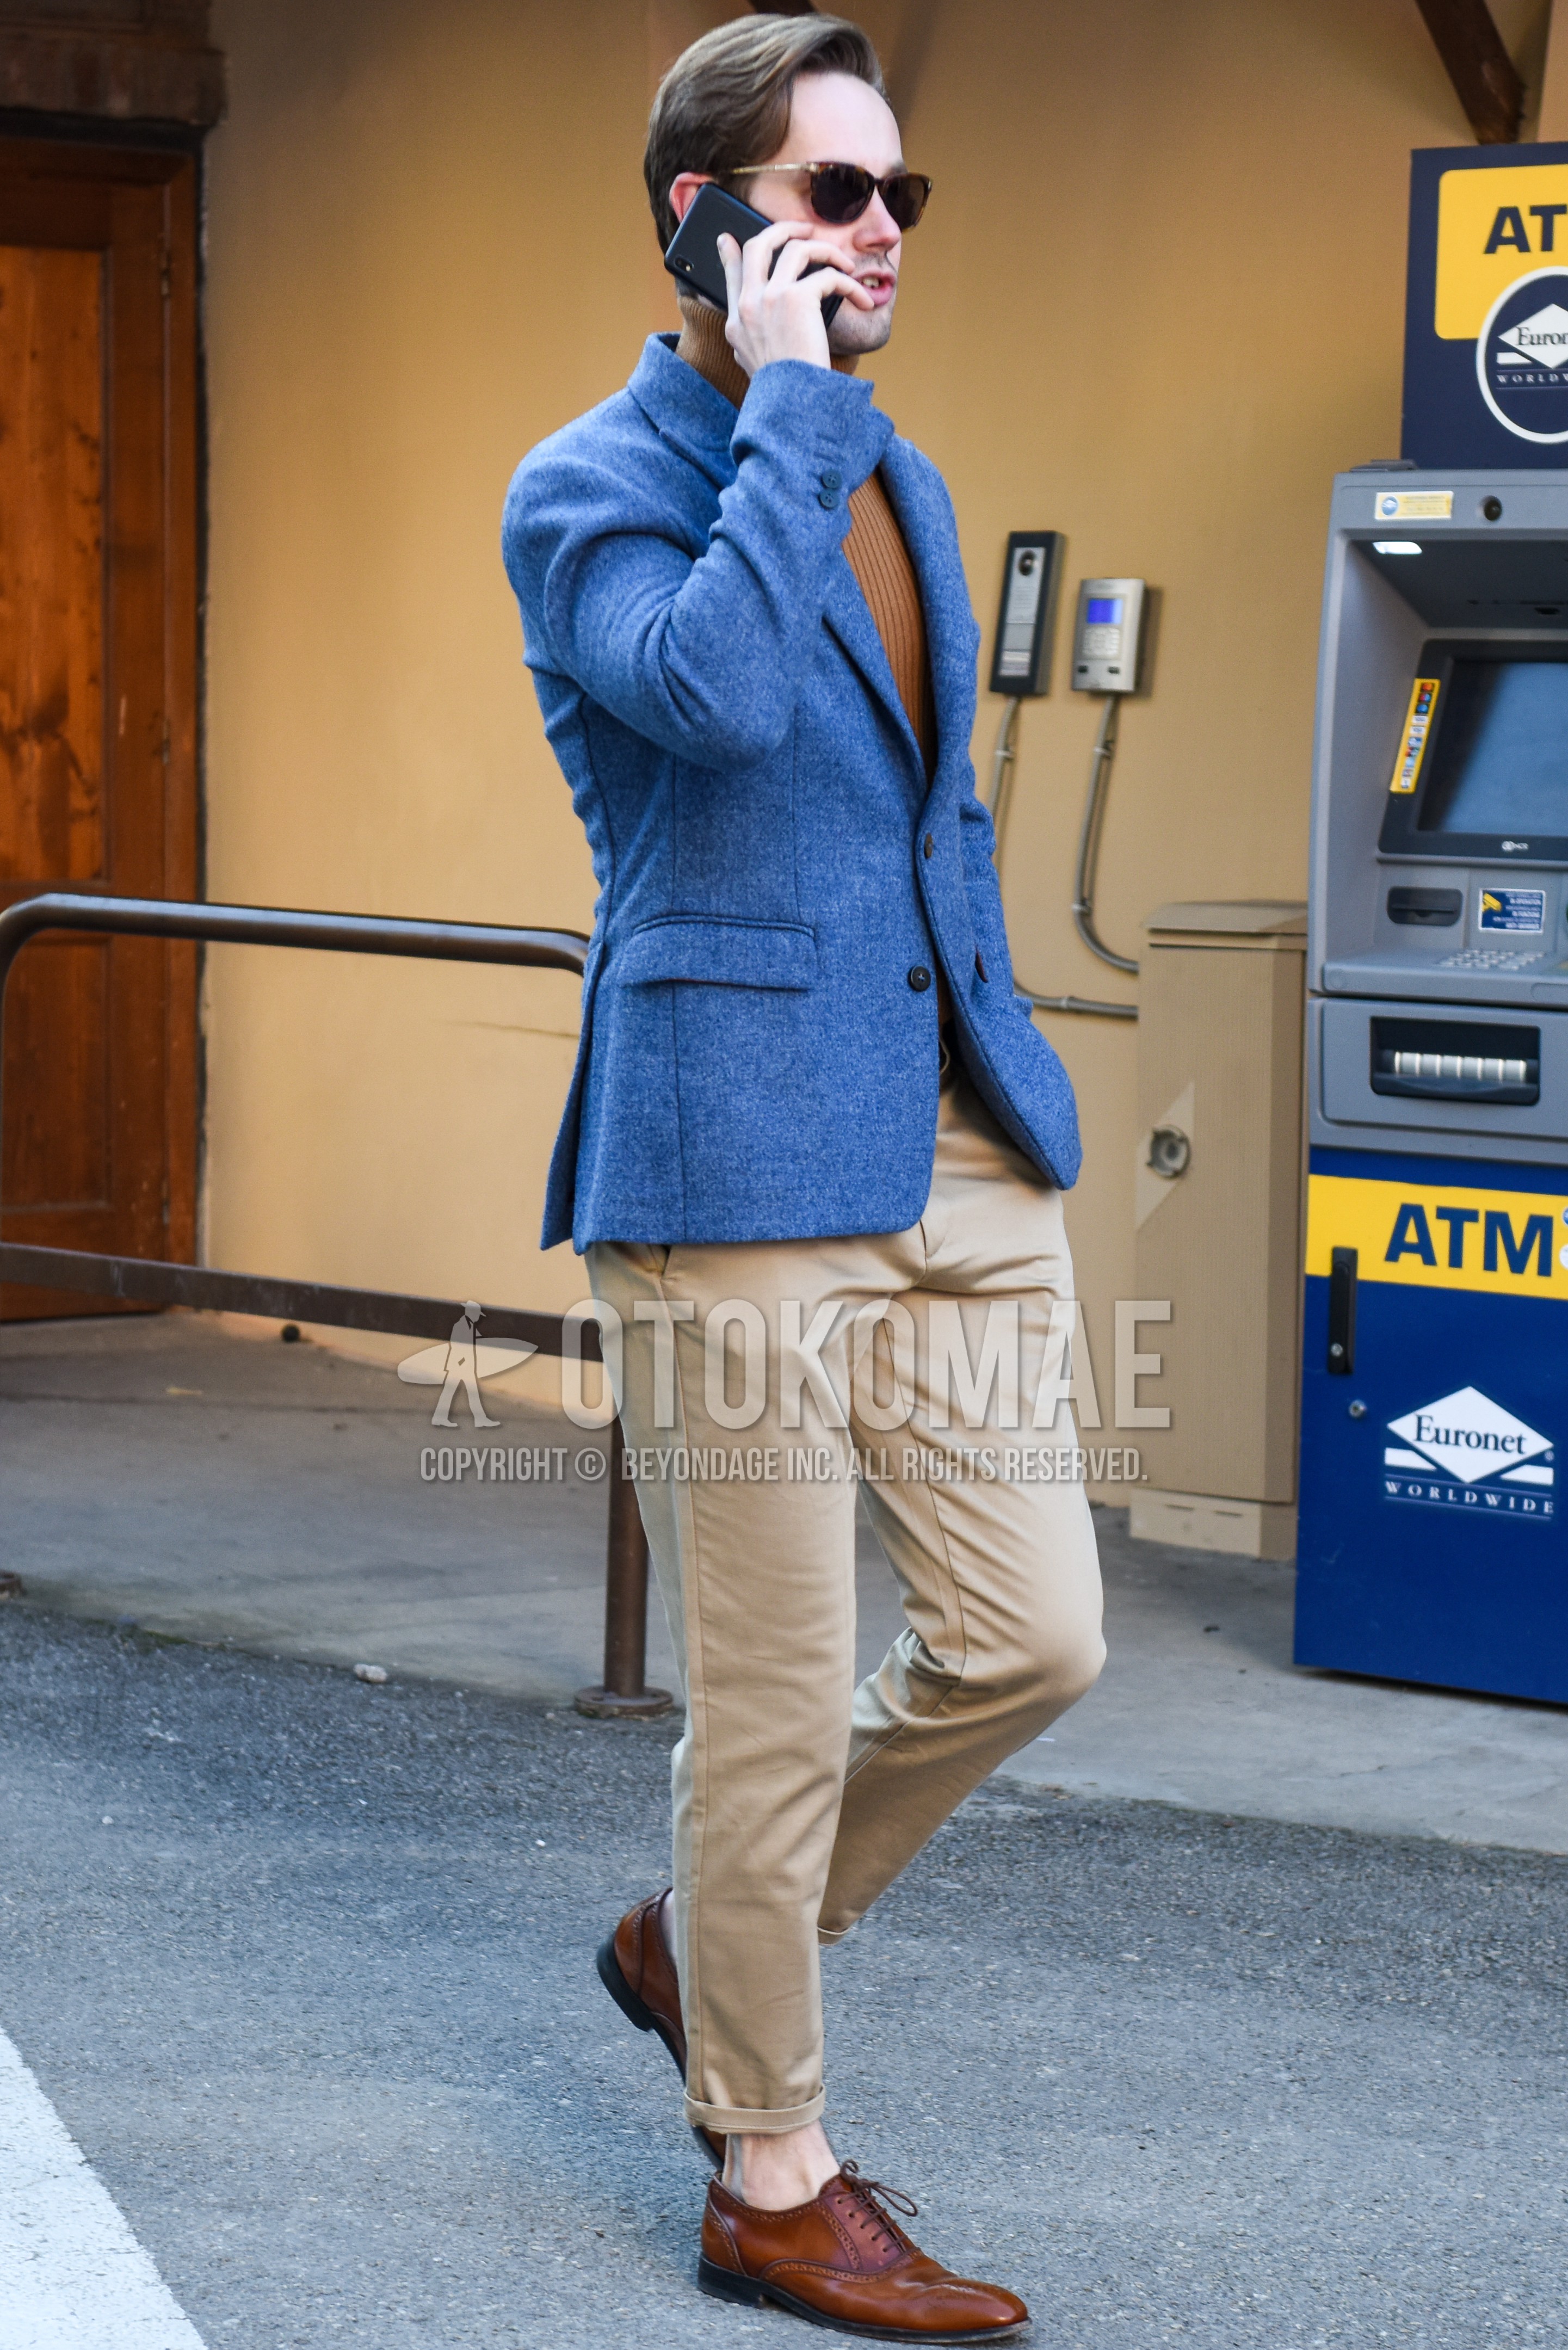 Men's spring autumn outfit with brown tortoiseshell sunglasses, gray plain tailored jacket, brown plain turtleneck knit, beige plain chinos, brown brogue shoes leather shoes.